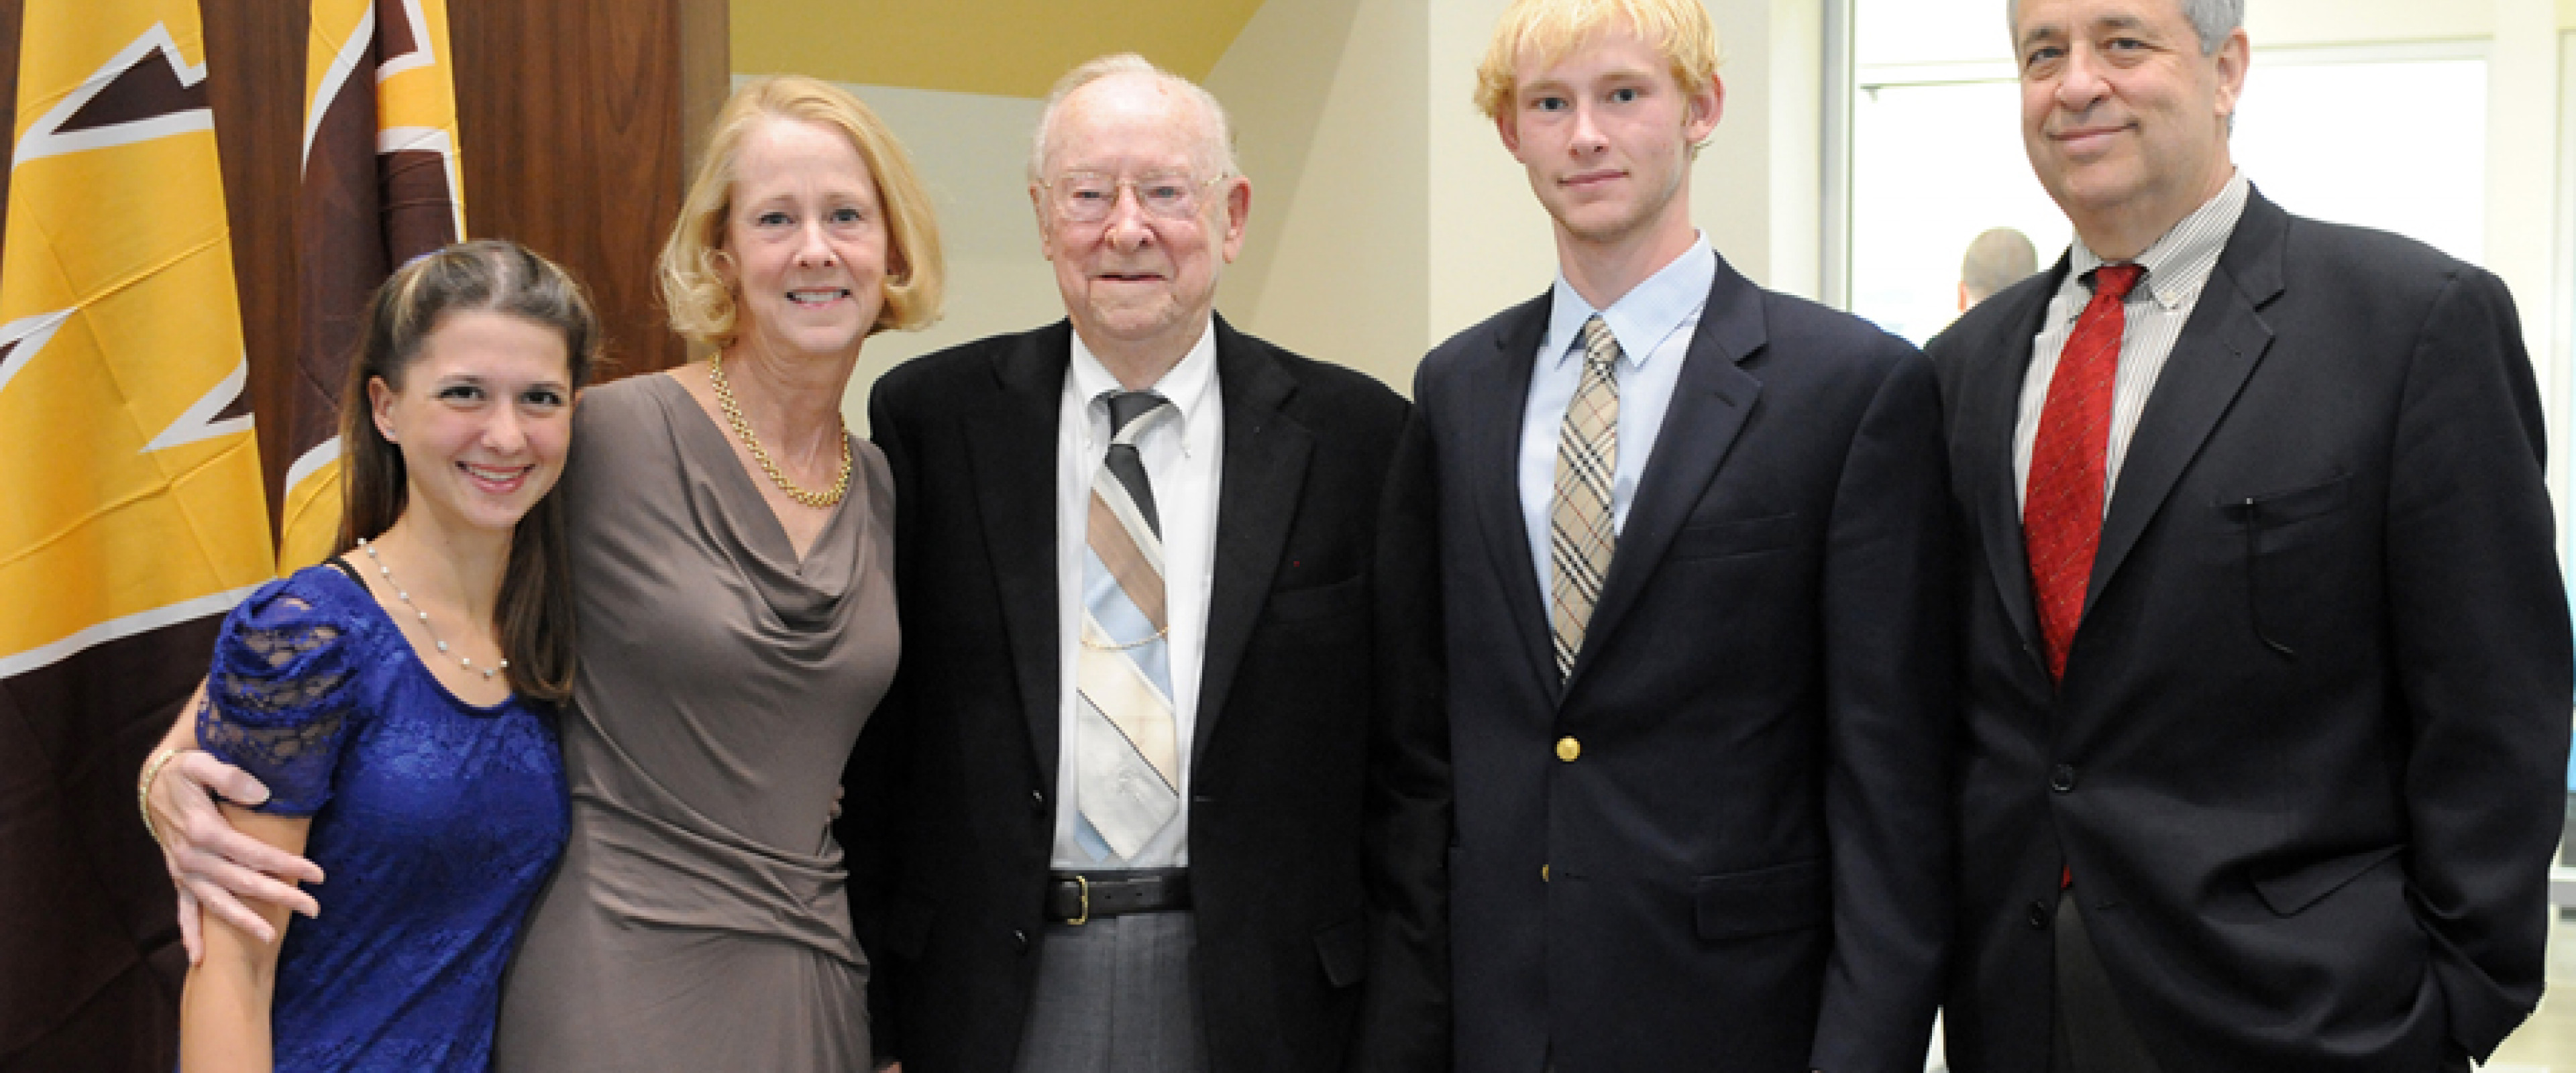 Carl Lee with his daughter, son in law, and grandchildren standing in the lounge at the reopening of the honors college.